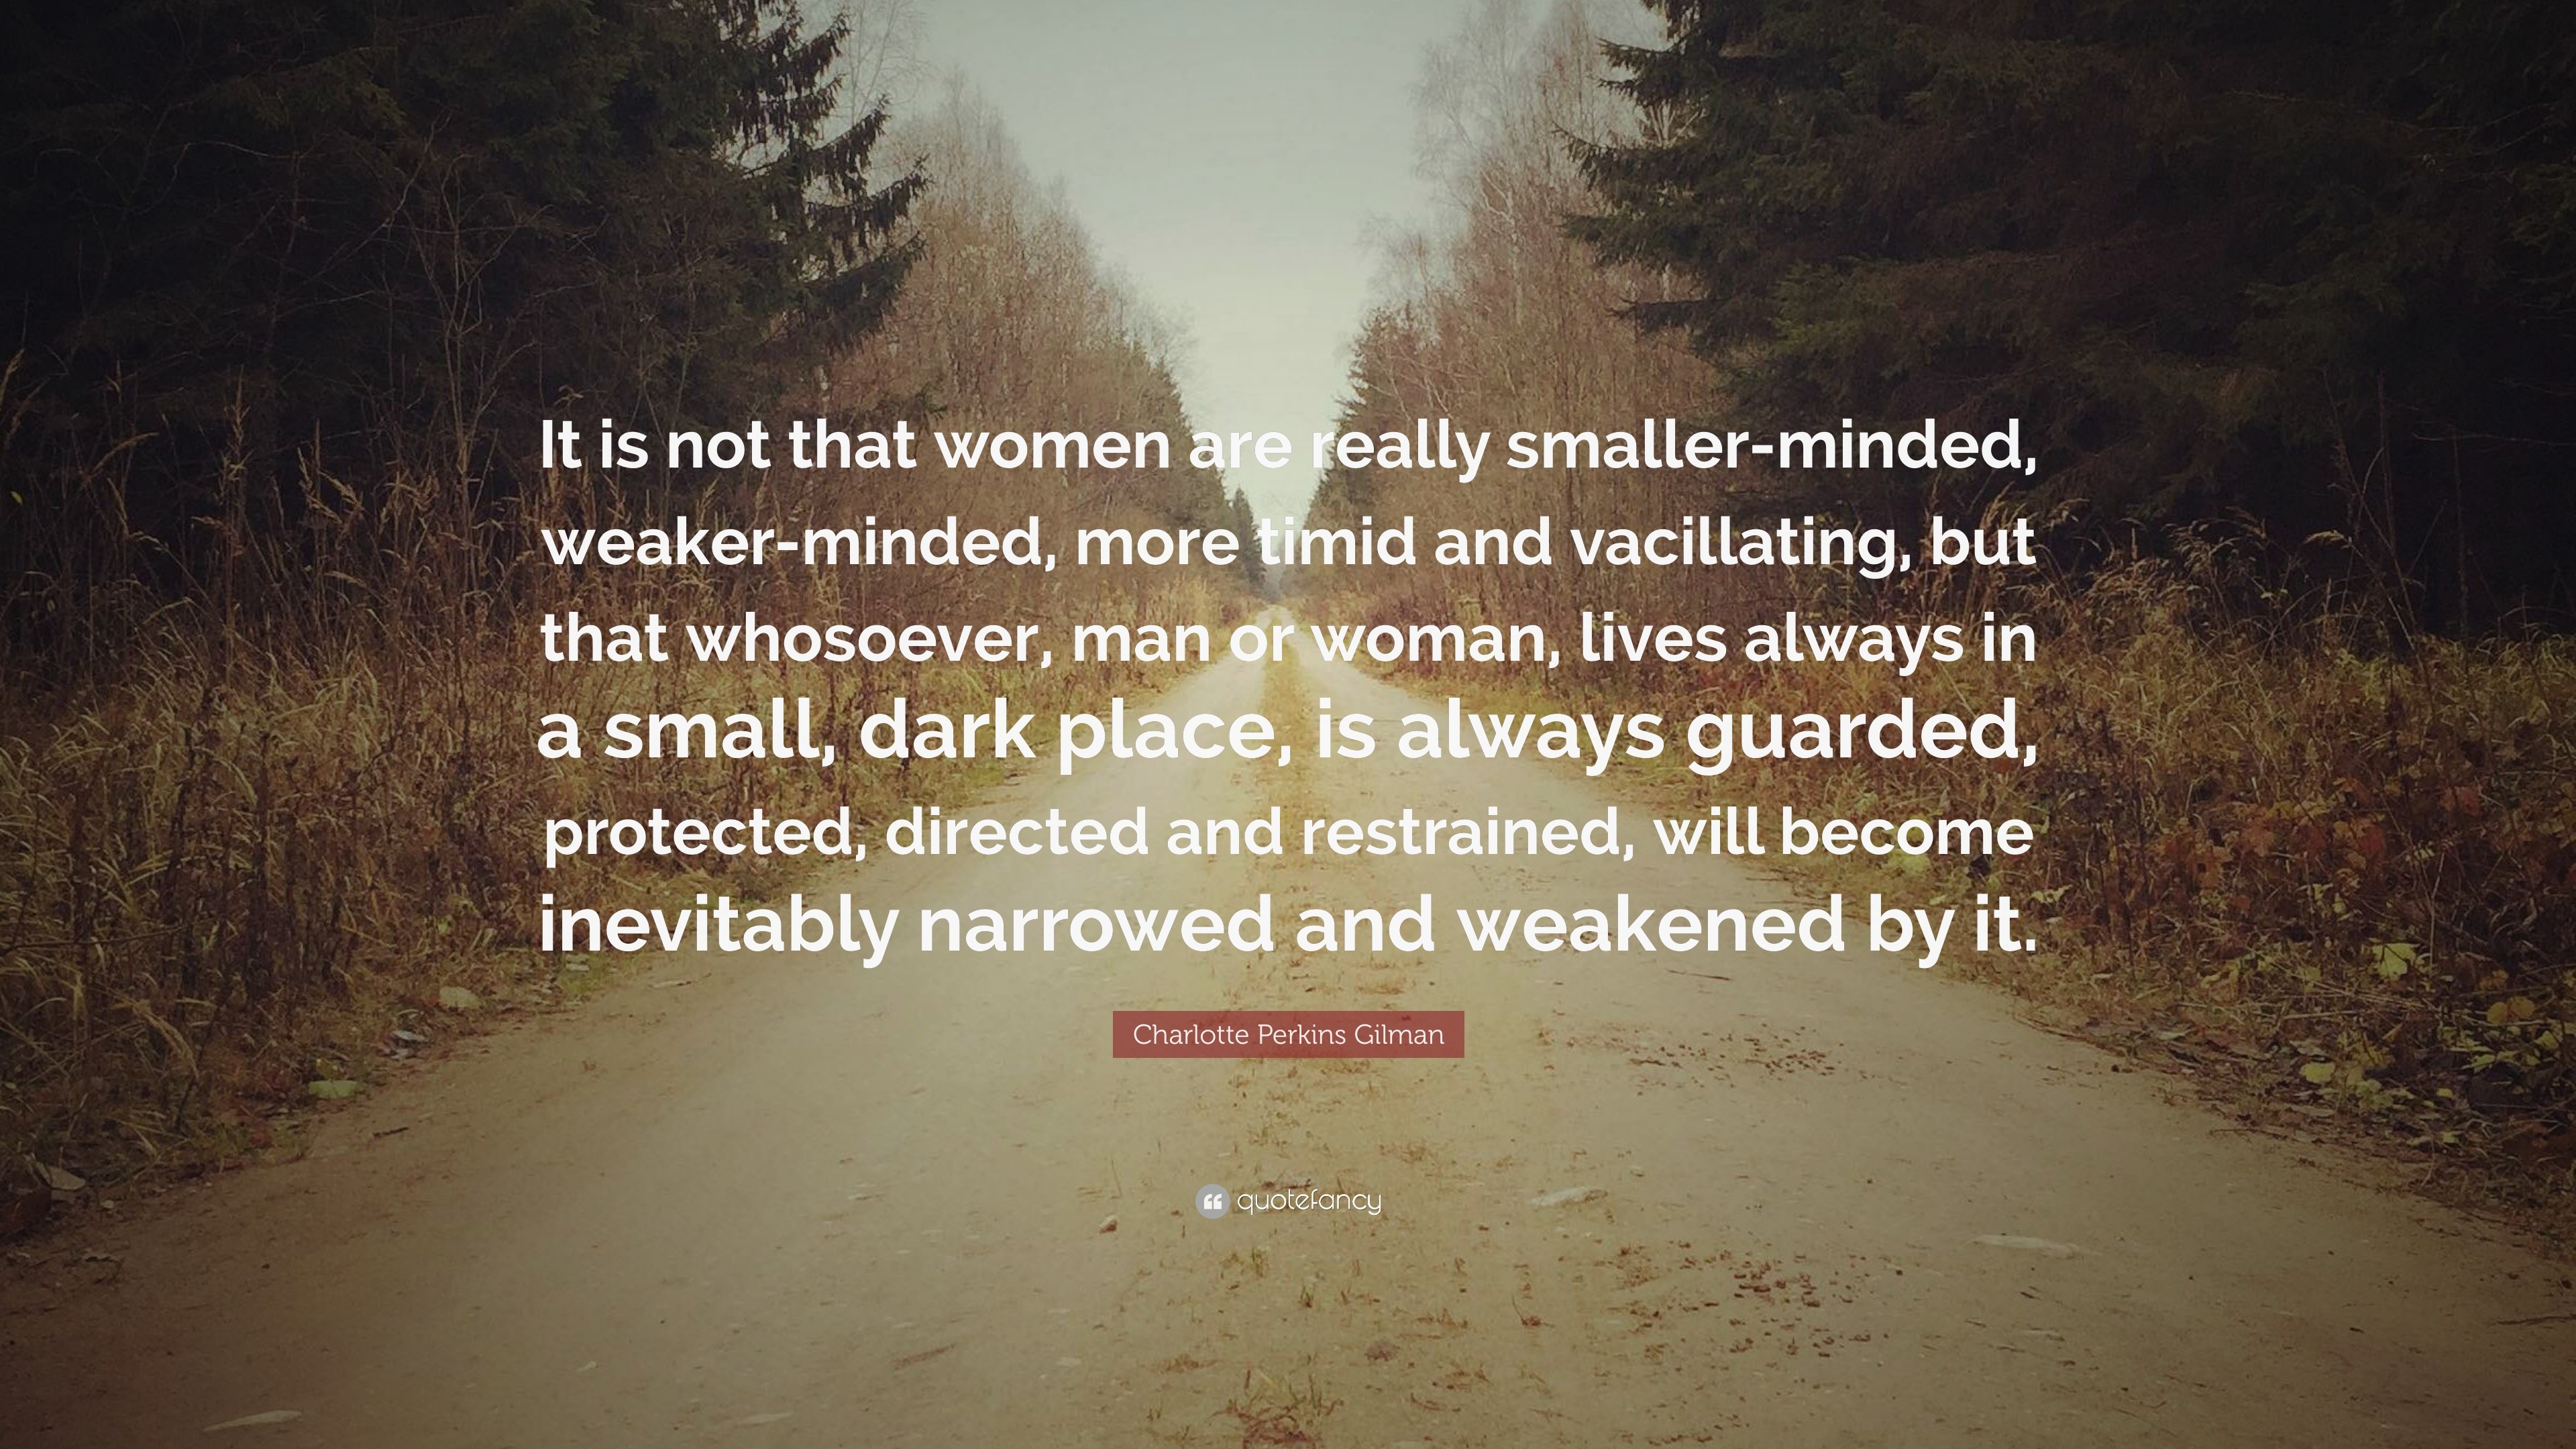 Charlotte Perkins Gilman Quote “It is not that women are really